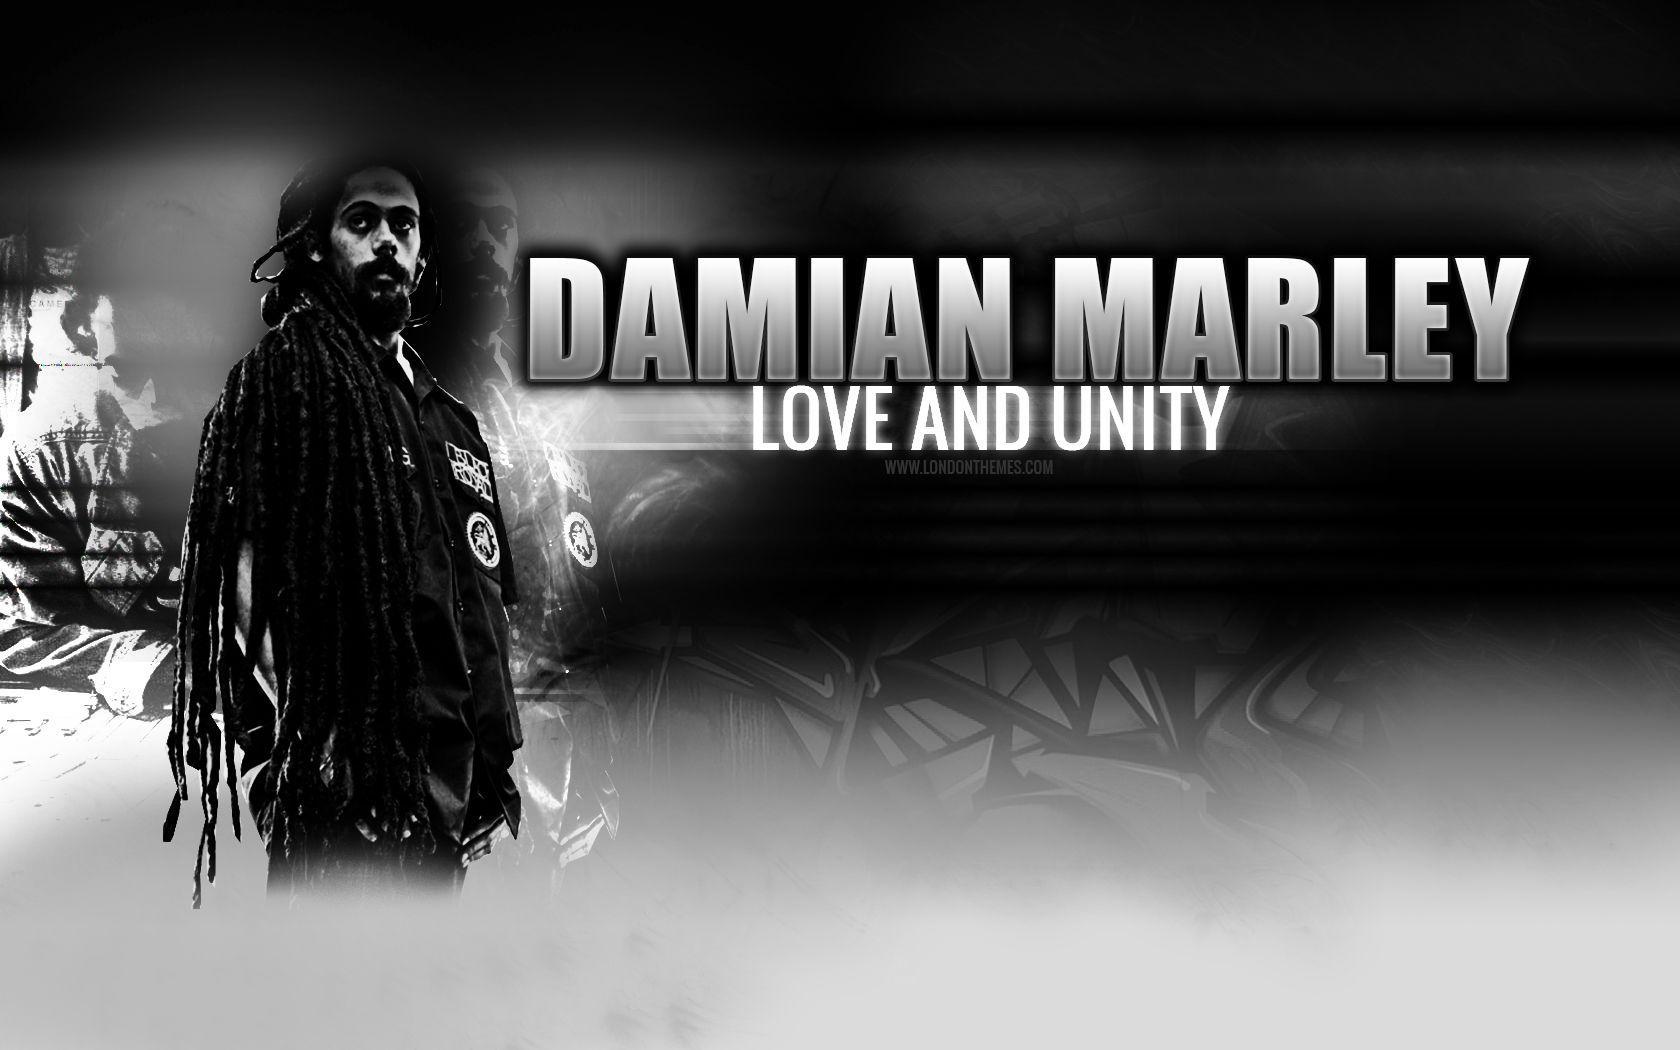 Damian Marley and Unity